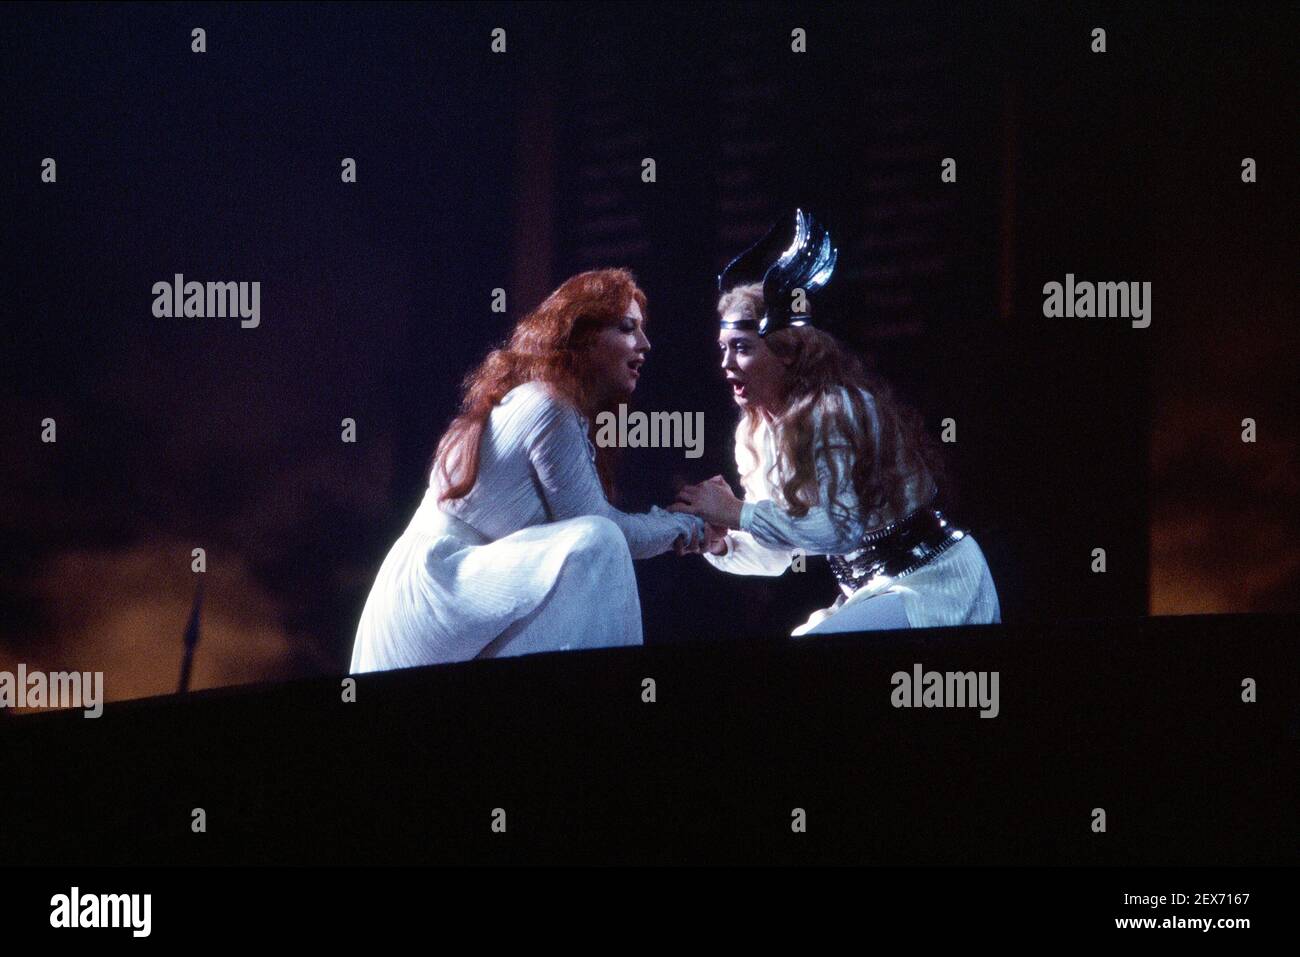 l-r: Josephine Barstow (Sieglinde), Linda Esther Gray (Brunhilde) in THE VALKYRIE by Wagner at English National Opera (ENO), London Coliseum  22/10/1983 conductor: Mark Elder  design: Maria Bjornson  director: David Pountney Stock Photo